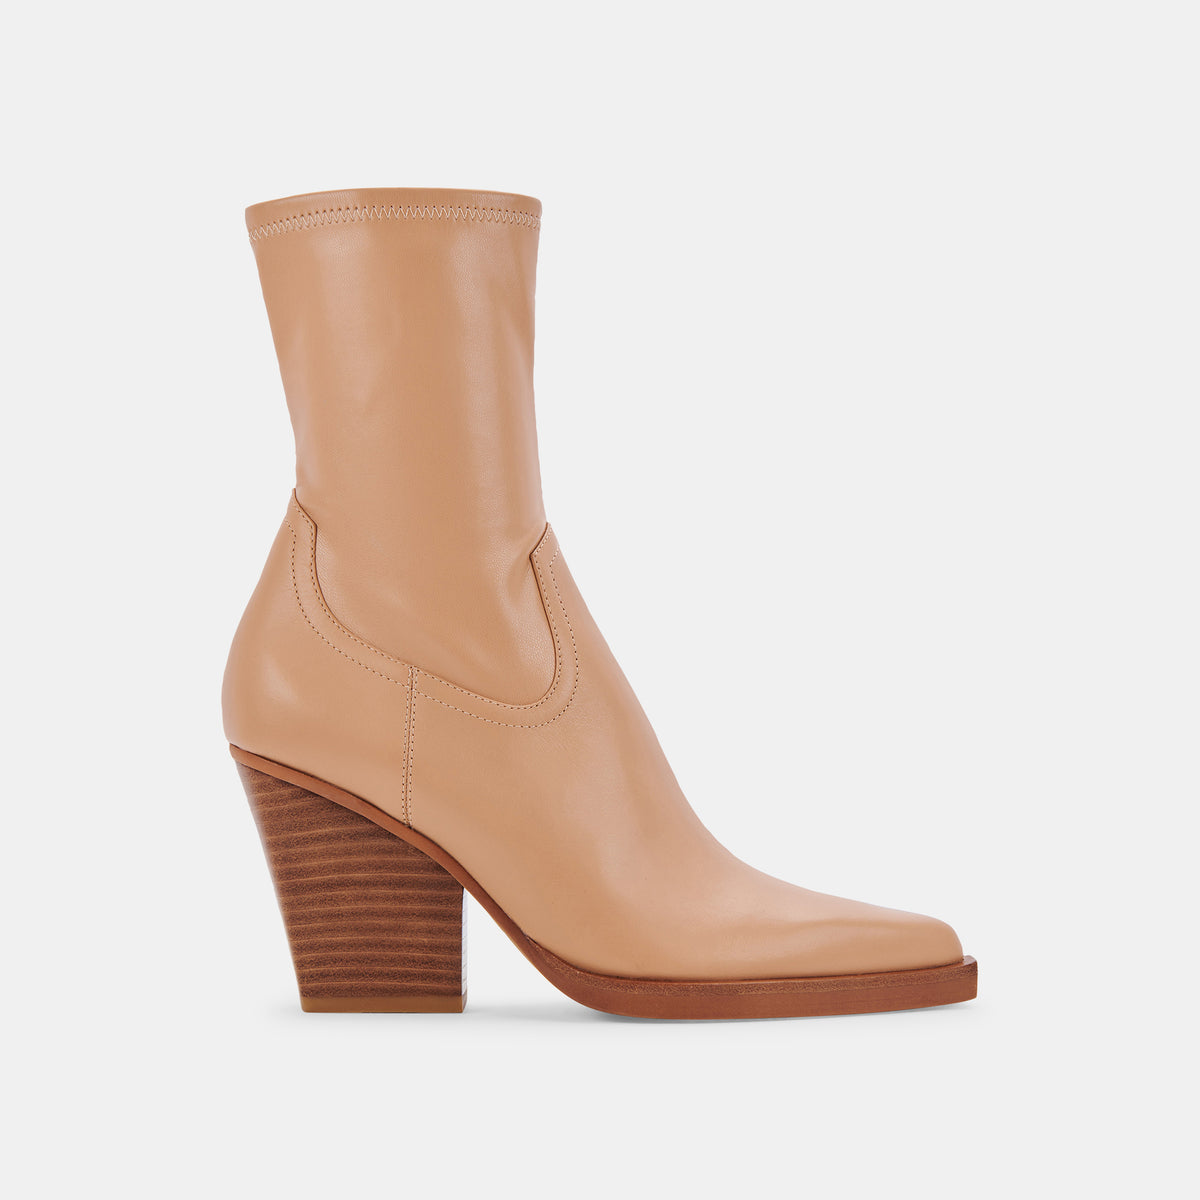 BOYD BOOTS TAN LEATHER – Dolce Vita